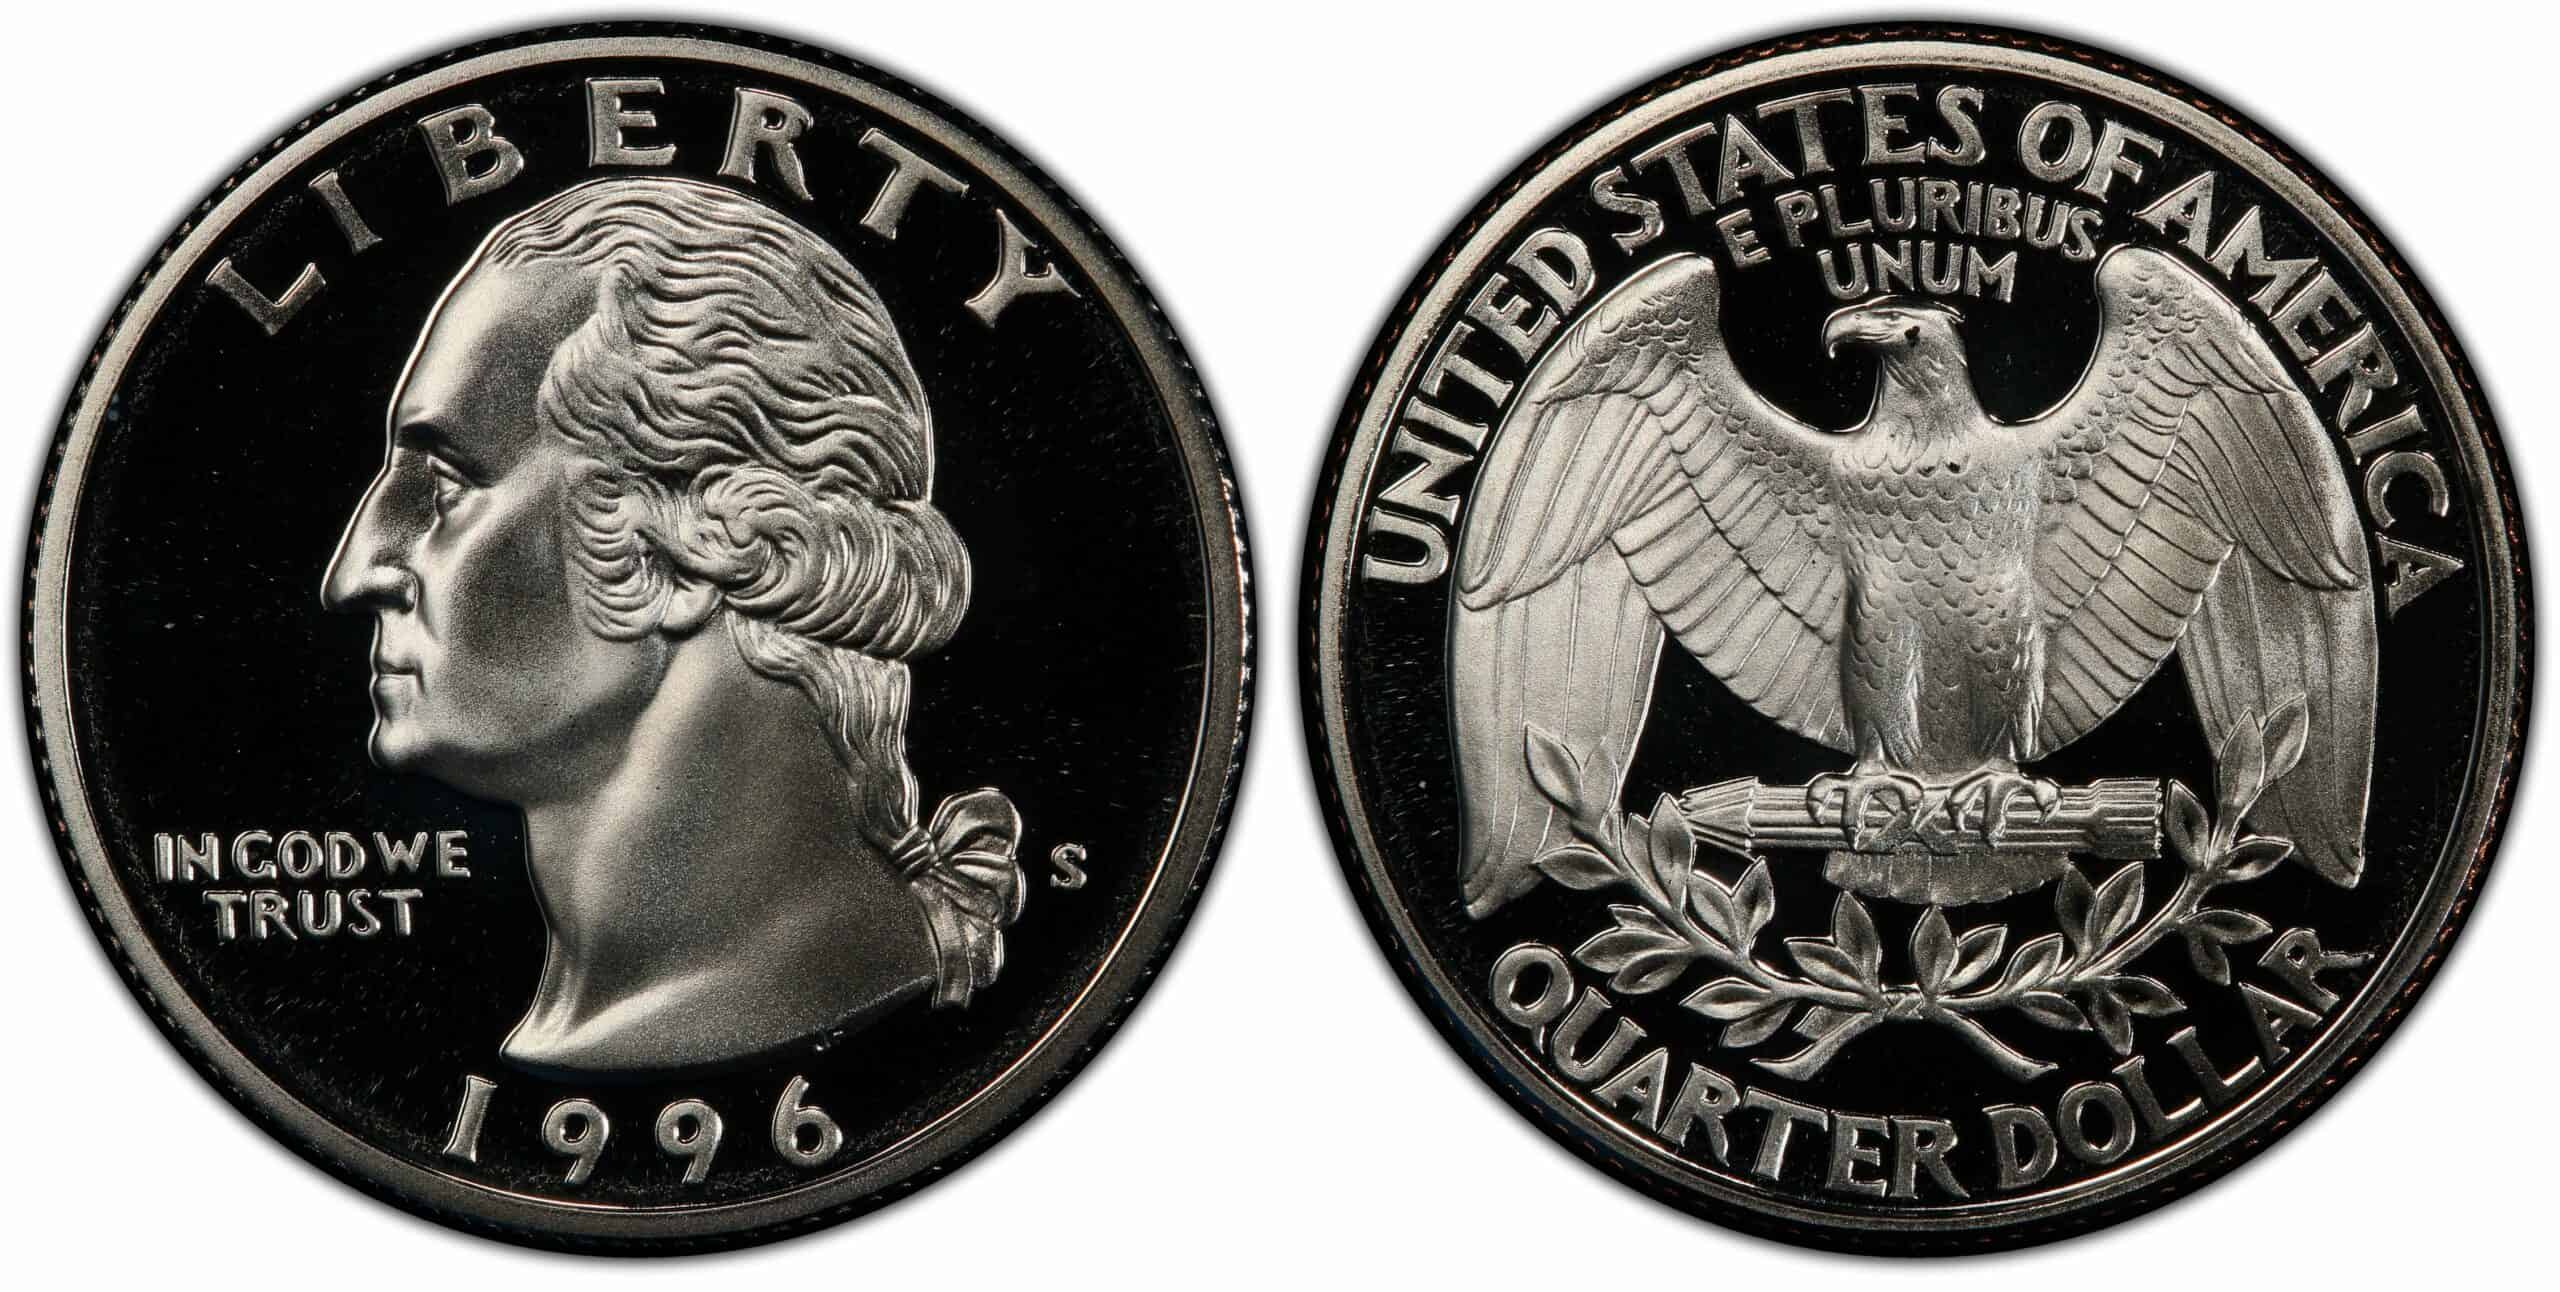 1996 S Proof Quarter Coin